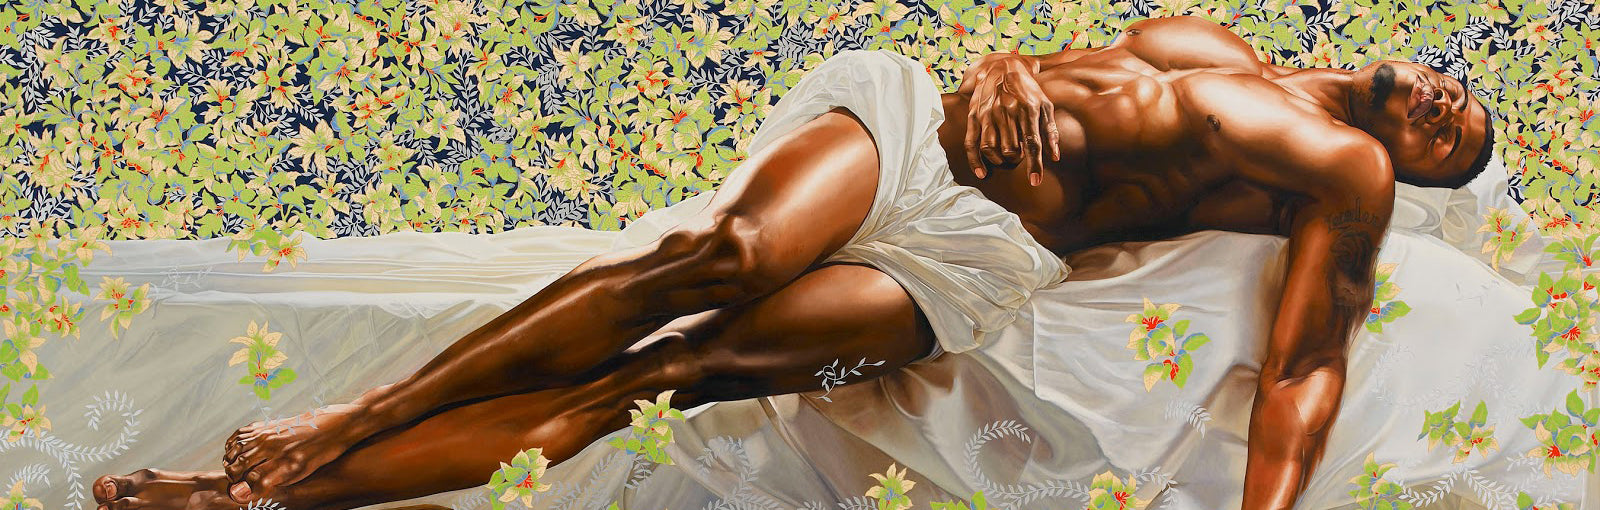 KEHINDE WILEY PAINTS  “A NEW REPUBLIC”